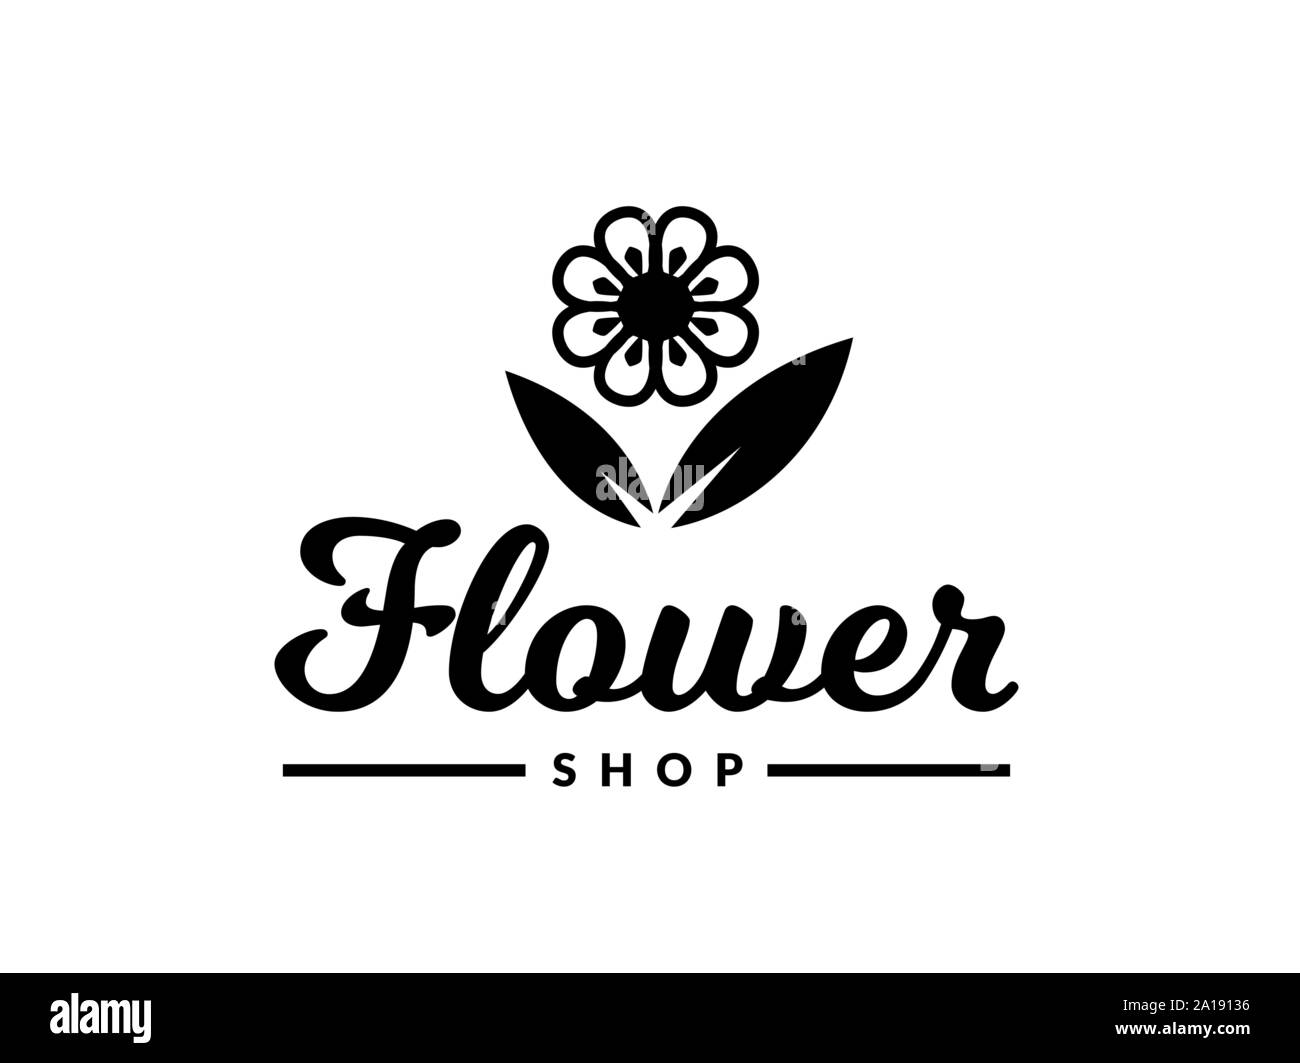 Flower shop logo. Vector floral symbol isolated on a white background. Stock Vector